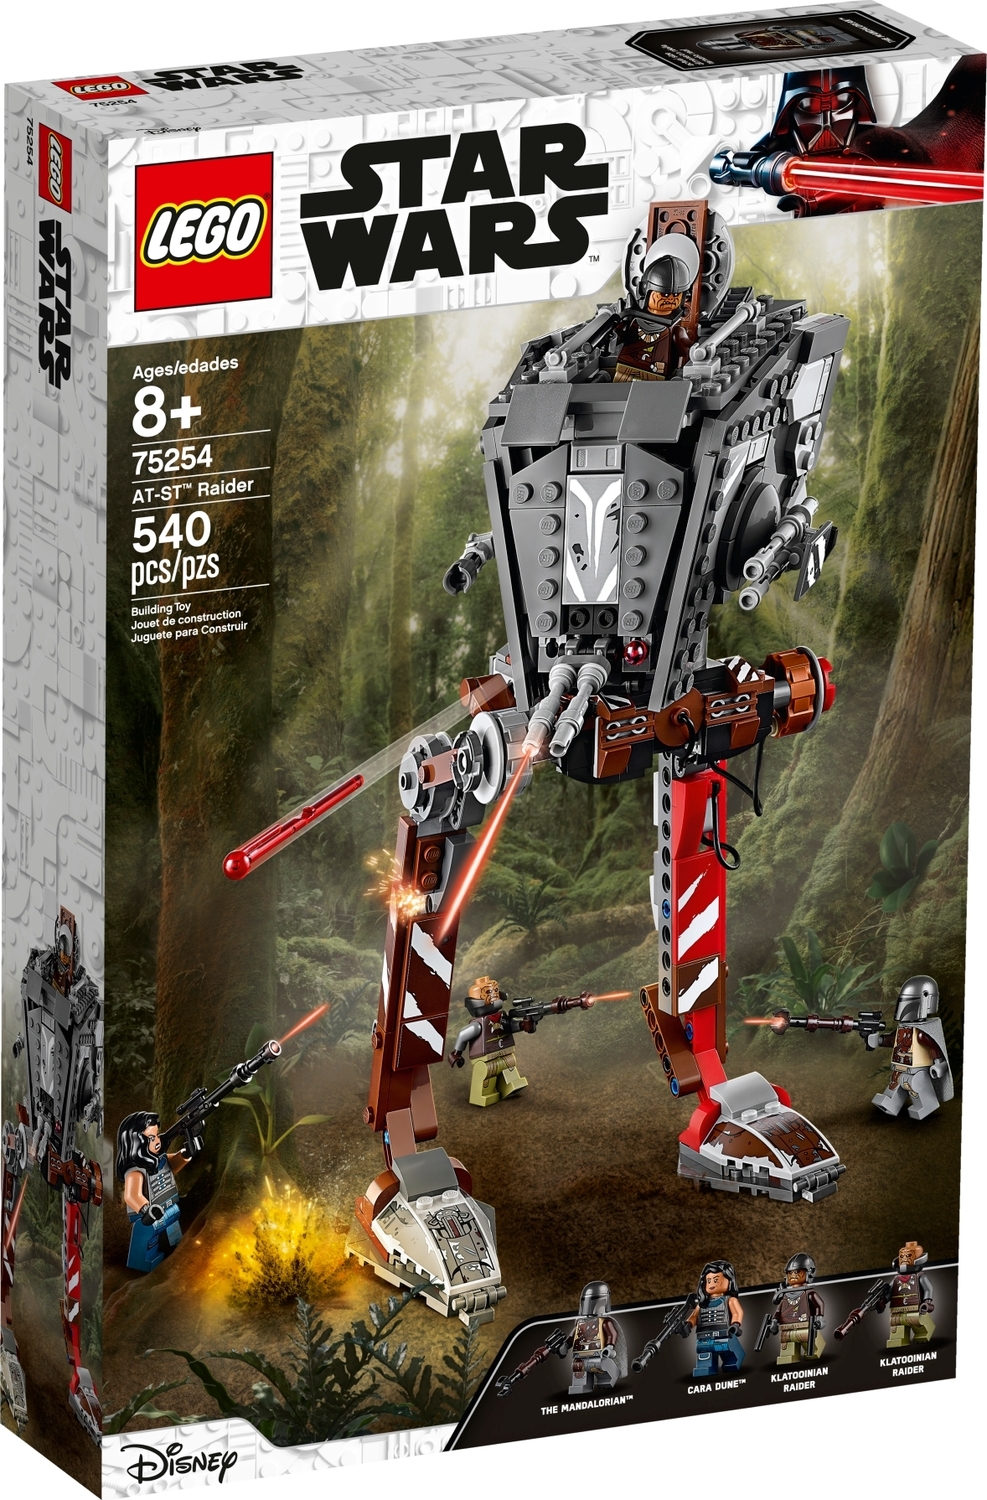 LEGO Wars: AT-ST Raider from The - Givens and Little